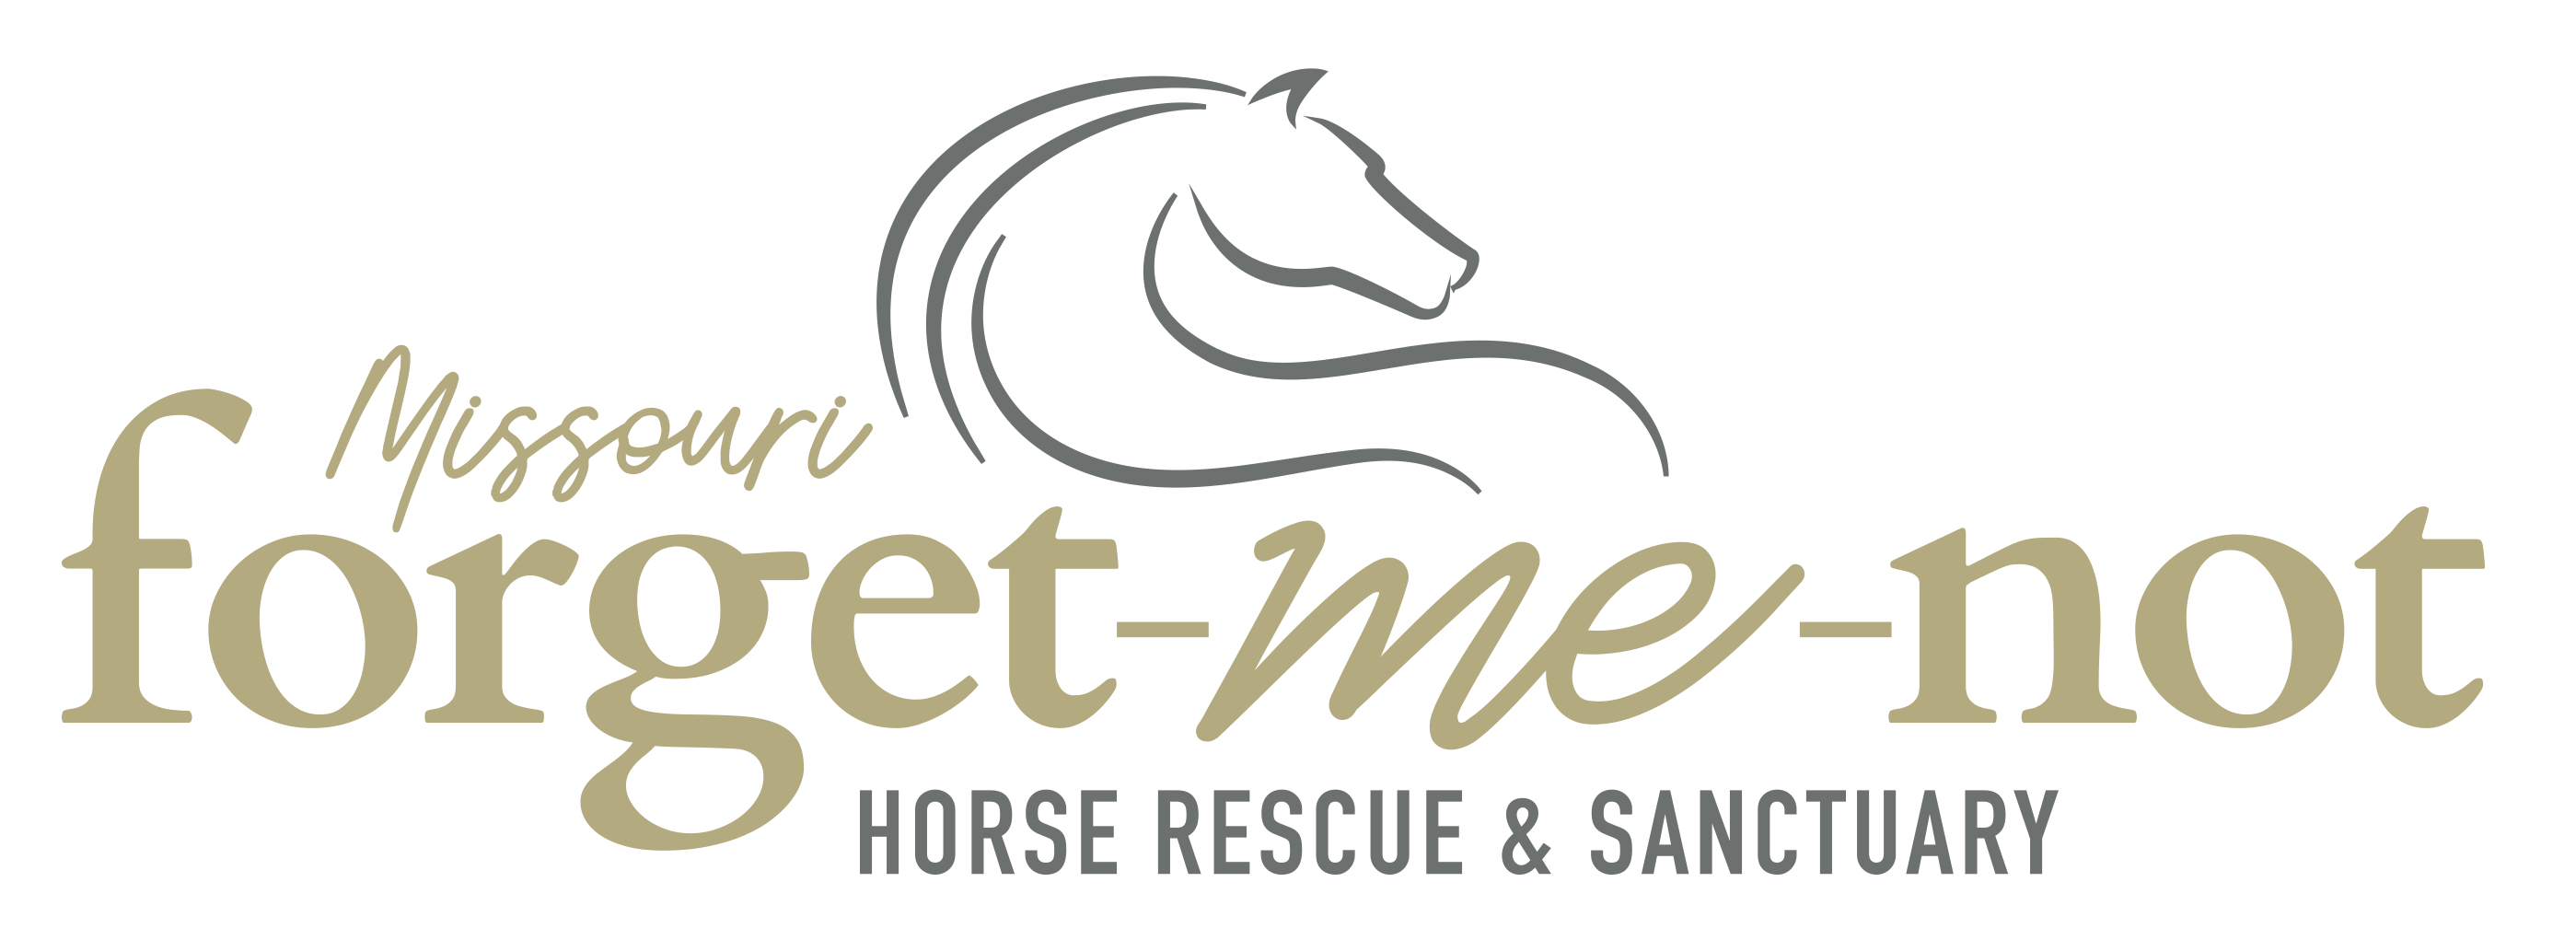 Missouri Forget-Me-Not Horse Rescue and Sanctuary logo